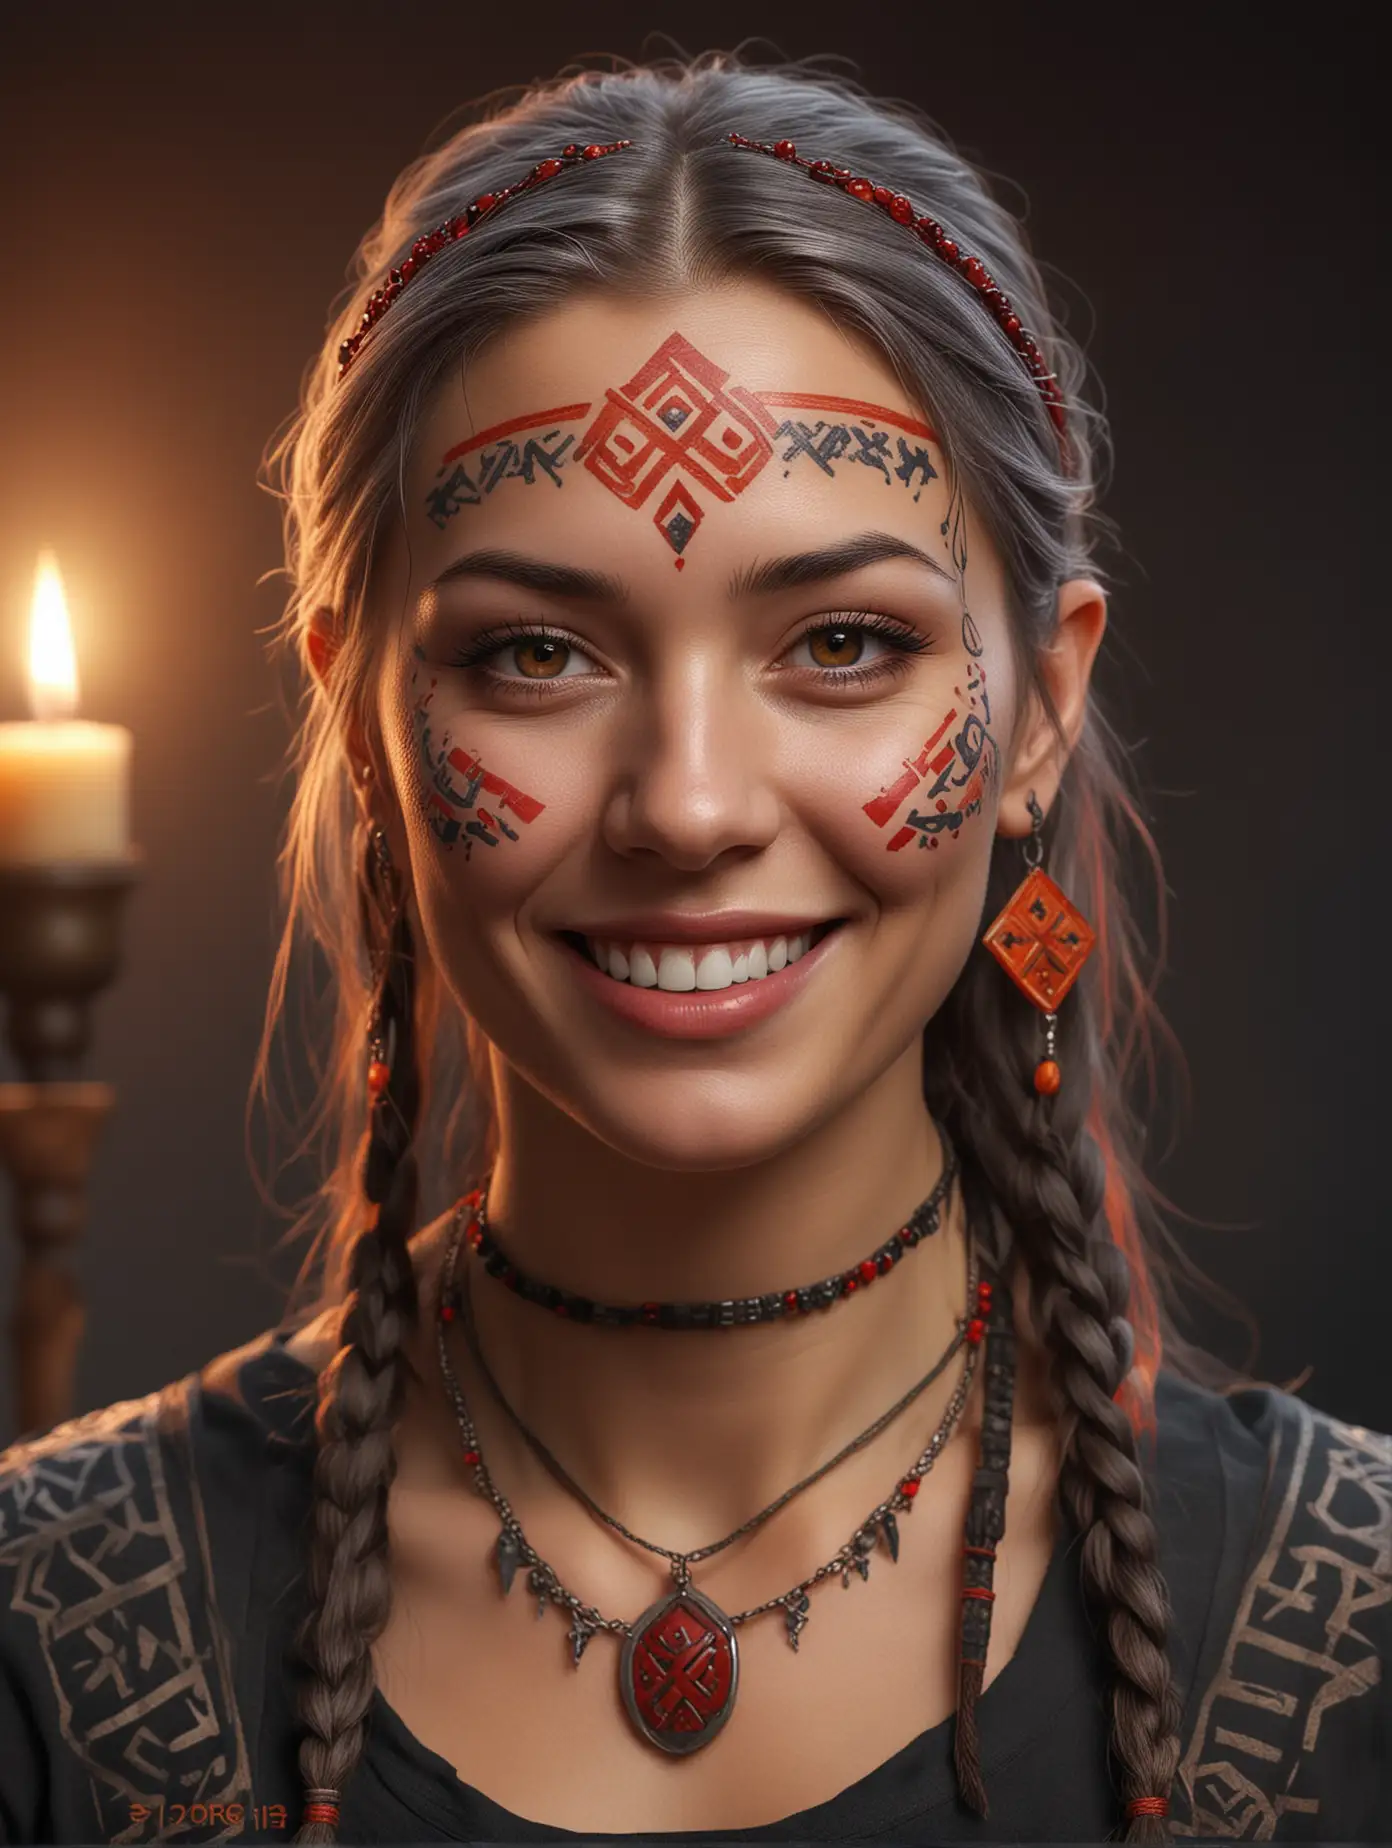 A portrait of a nice smiling younger female nordic shaman with red runic tattoos in face, a very dark reddish and grey hair wearing a dark tunic, adorned with red and orange gems and many golden runic signs : 1. | candles and lanterns : 1. | forge workshop in the back : 1. | Very detailed, sunset, nordic atmosphere : 1. | Highly detailed, high precision, focus on textures, hyperrealistic : 1.